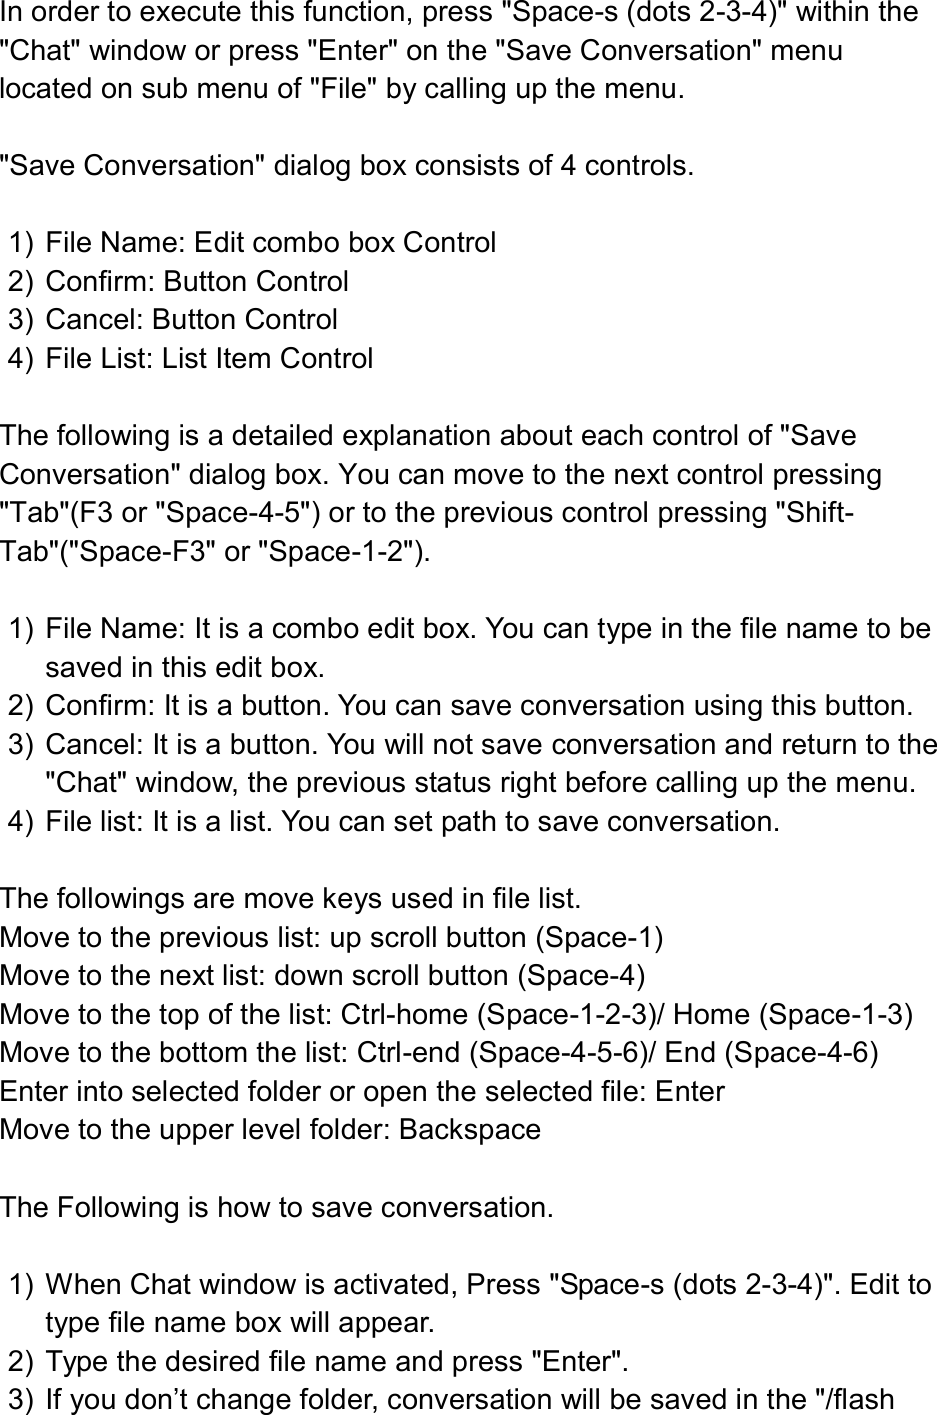  In order to execute this function, press &quot;Space-s (dots 2-3-4)&quot; within the &quot;Chat&quot; window or press &quot;Enter&quot; on the &quot;Save Conversation&quot; menu located on sub menu of &quot;File&quot; by calling up the menu.  &quot;Save Conversation&quot; dialog box consists of 4 controls.  1)  File Name: Edit combo box Control 2)  Confirm: Button Control 3)  Cancel: Button Control 4)  File List: List Item Control  The following is a detailed explanation about each control of &quot;Save Conversation&quot; dialog box. You can move to the next control pressing &quot;Tab&quot;(F3 or &quot;Space-4-5&quot;) or to the previous control pressing &quot;Shift-Tab&quot;(&quot;Space-F3&quot; or &quot;Space-1-2&quot;).  1)  File Name: It is a combo edit box. You can type in the file name to be saved in this edit box. 2)  Confirm: It is a button. You can save conversation using this button. 3)  Cancel: It is a button. You will not save conversation and return to the &quot;Chat&quot; window, the previous status right before calling up the menu.   4)  File list: It is a list. You can set path to save conversation.    The followings are move keys used in file list.   Move to the previous list: up scroll button (Space-1) Move to the next list: down scroll button (Space-4) Move to the top of the list: Ctrl-home (Space-1-2-3)/ Home (Space-1-3) Move to the bottom the list: Ctrl-end (Space-4-5-6)/ End (Space-4-6) Enter into selected folder or open the selected file: Enter Move to the upper level folder: Backspace  The Following is how to save conversation.  1)  When Chat window is activated, Press &quot;Space-s (dots 2-3-4)&quot;. Edit to type file name box will appear. 2)  Type the desired file name and press &quot;Enter&quot;. 3)  If you don’t change folder, conversation will be saved in the &quot;/flash 